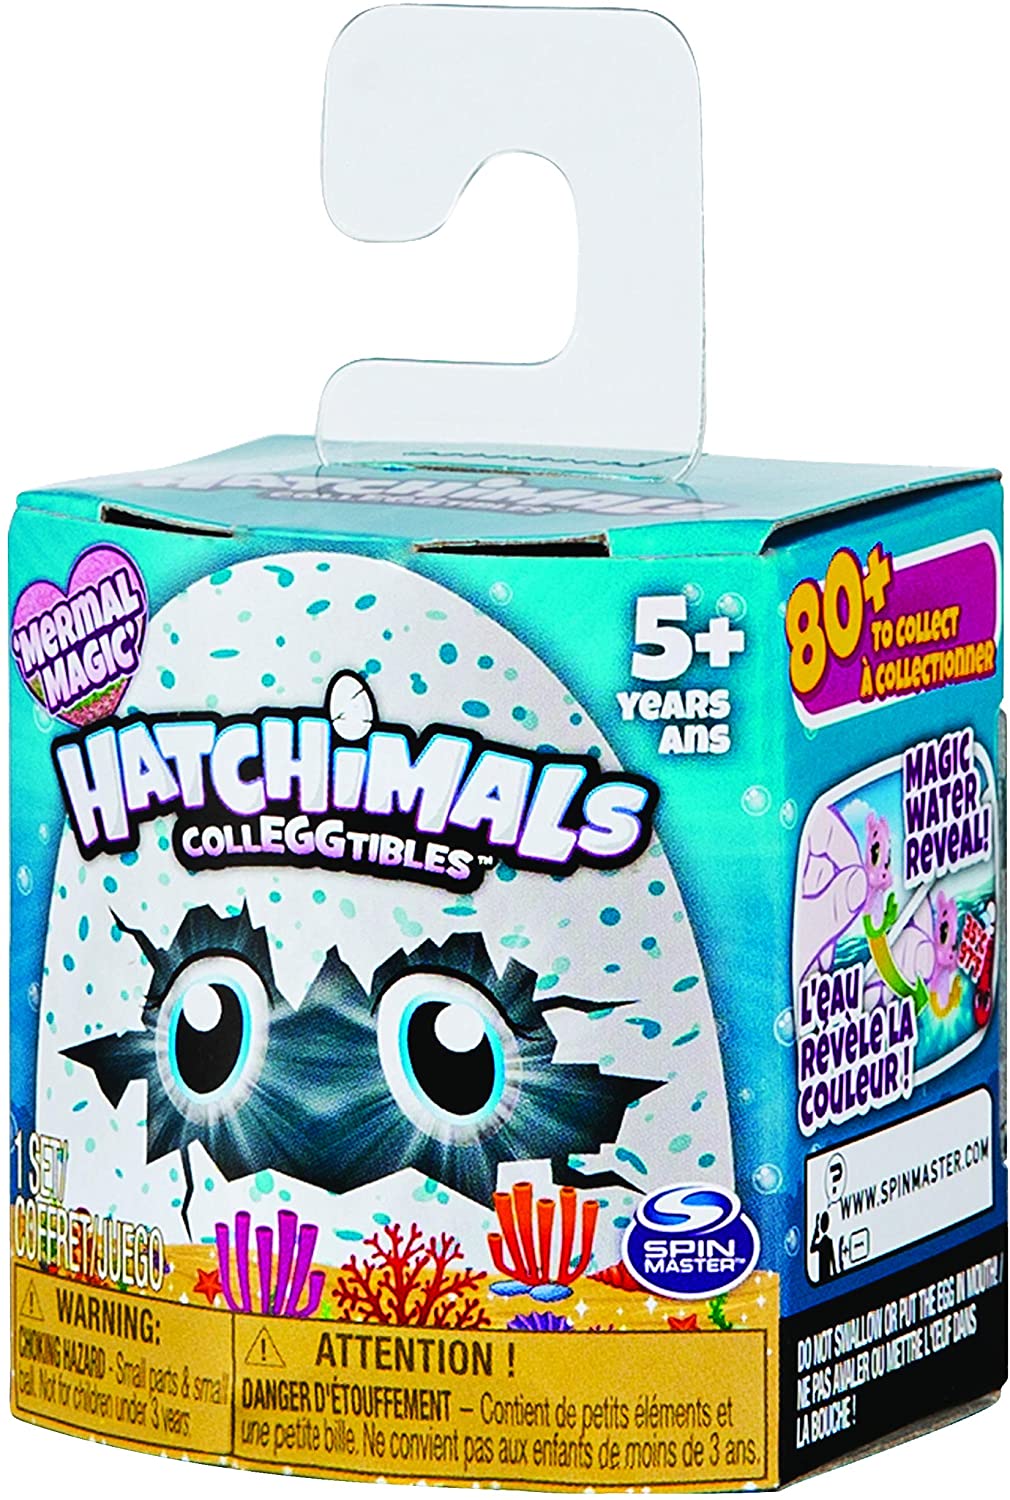 Hatchimals Colleggtibles Collectible Figure, Single pack, Multicoloured